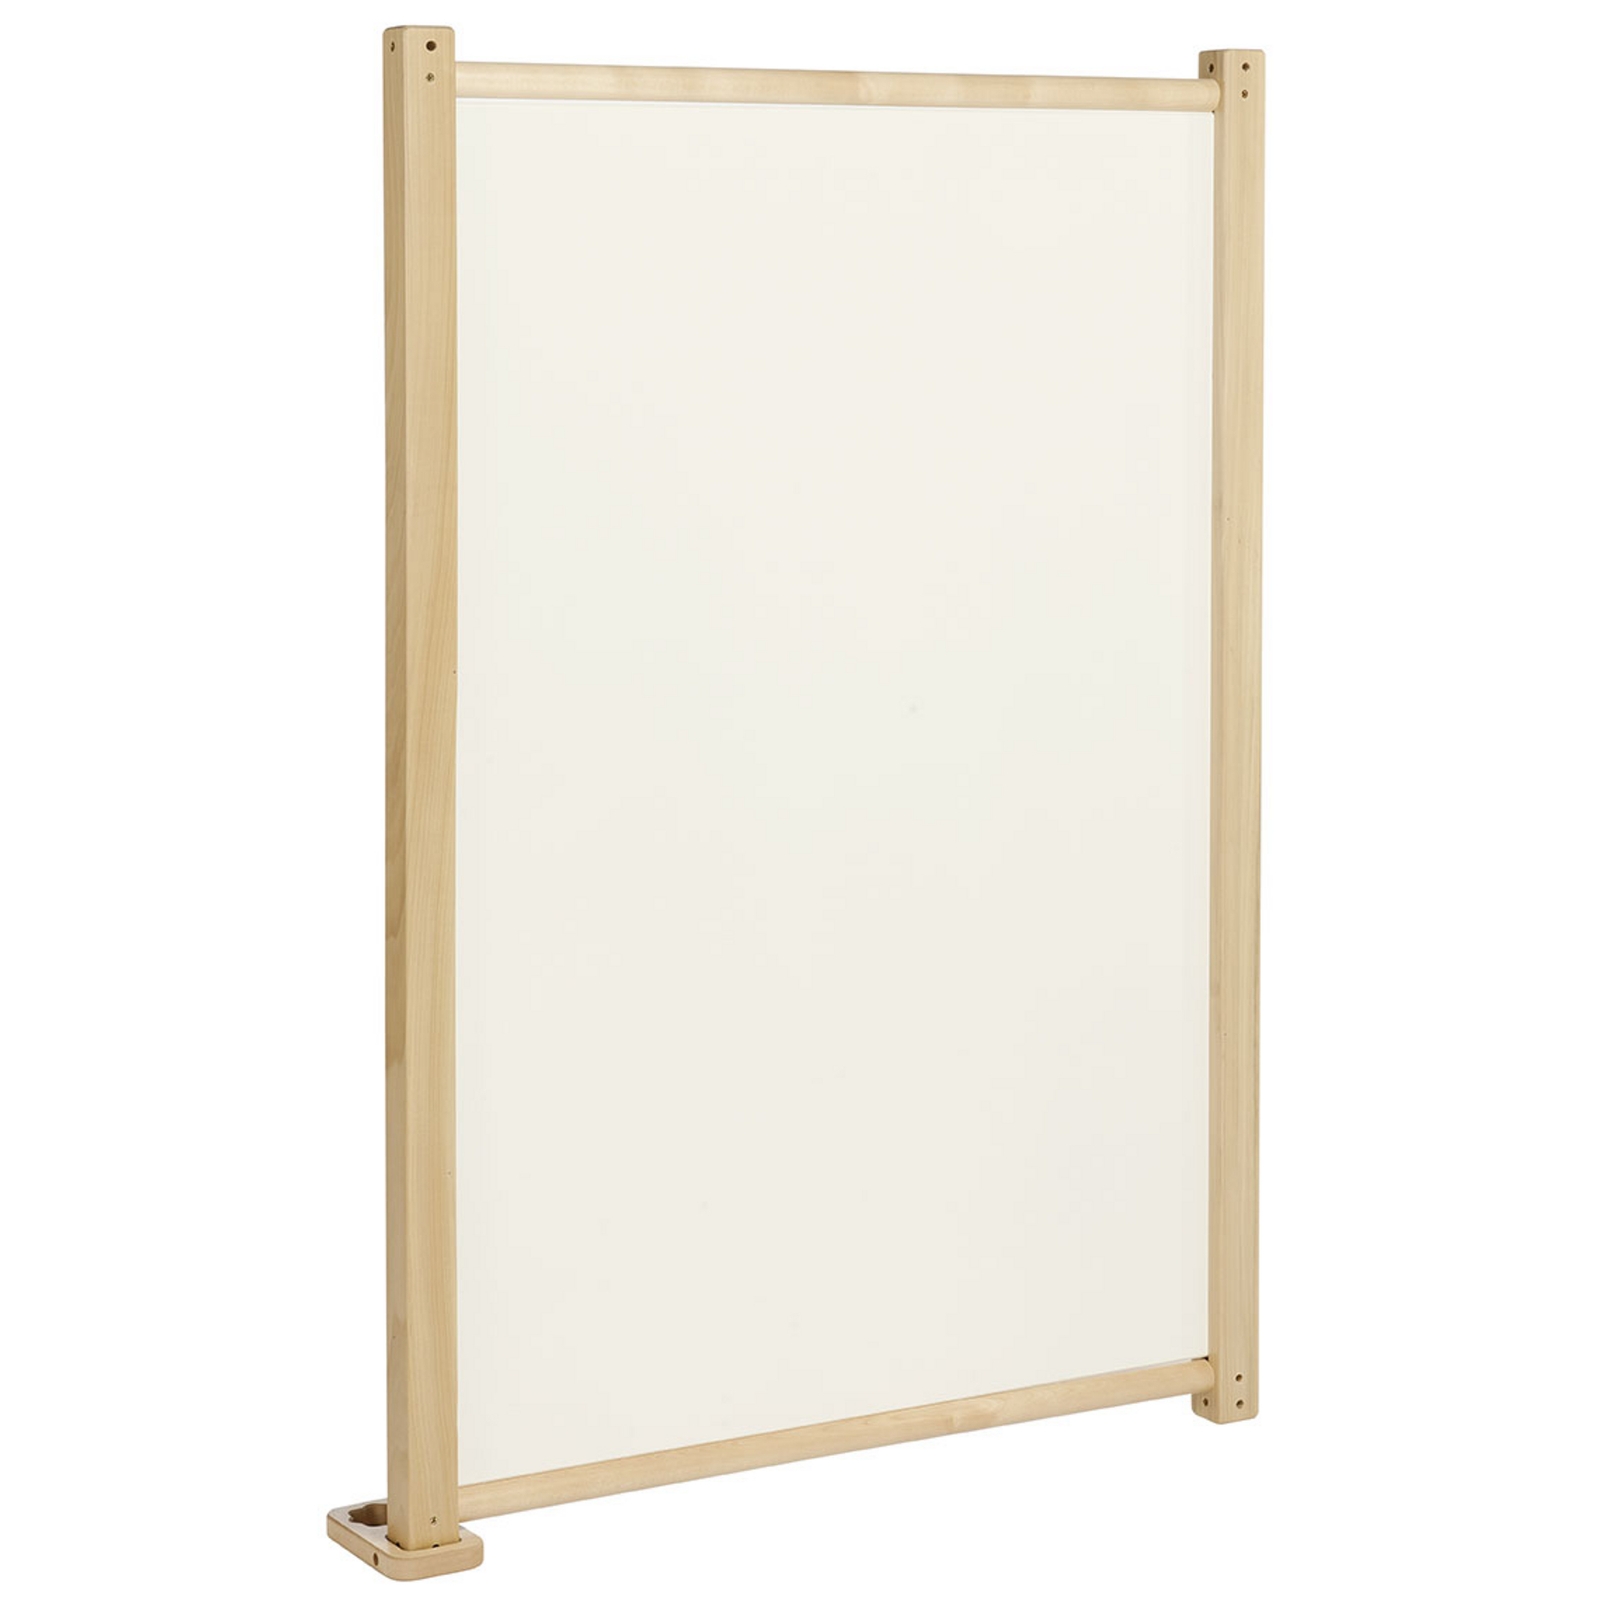 Playscapes Whiteboard Panel - H120 x W79 x D4.3 cm - Each